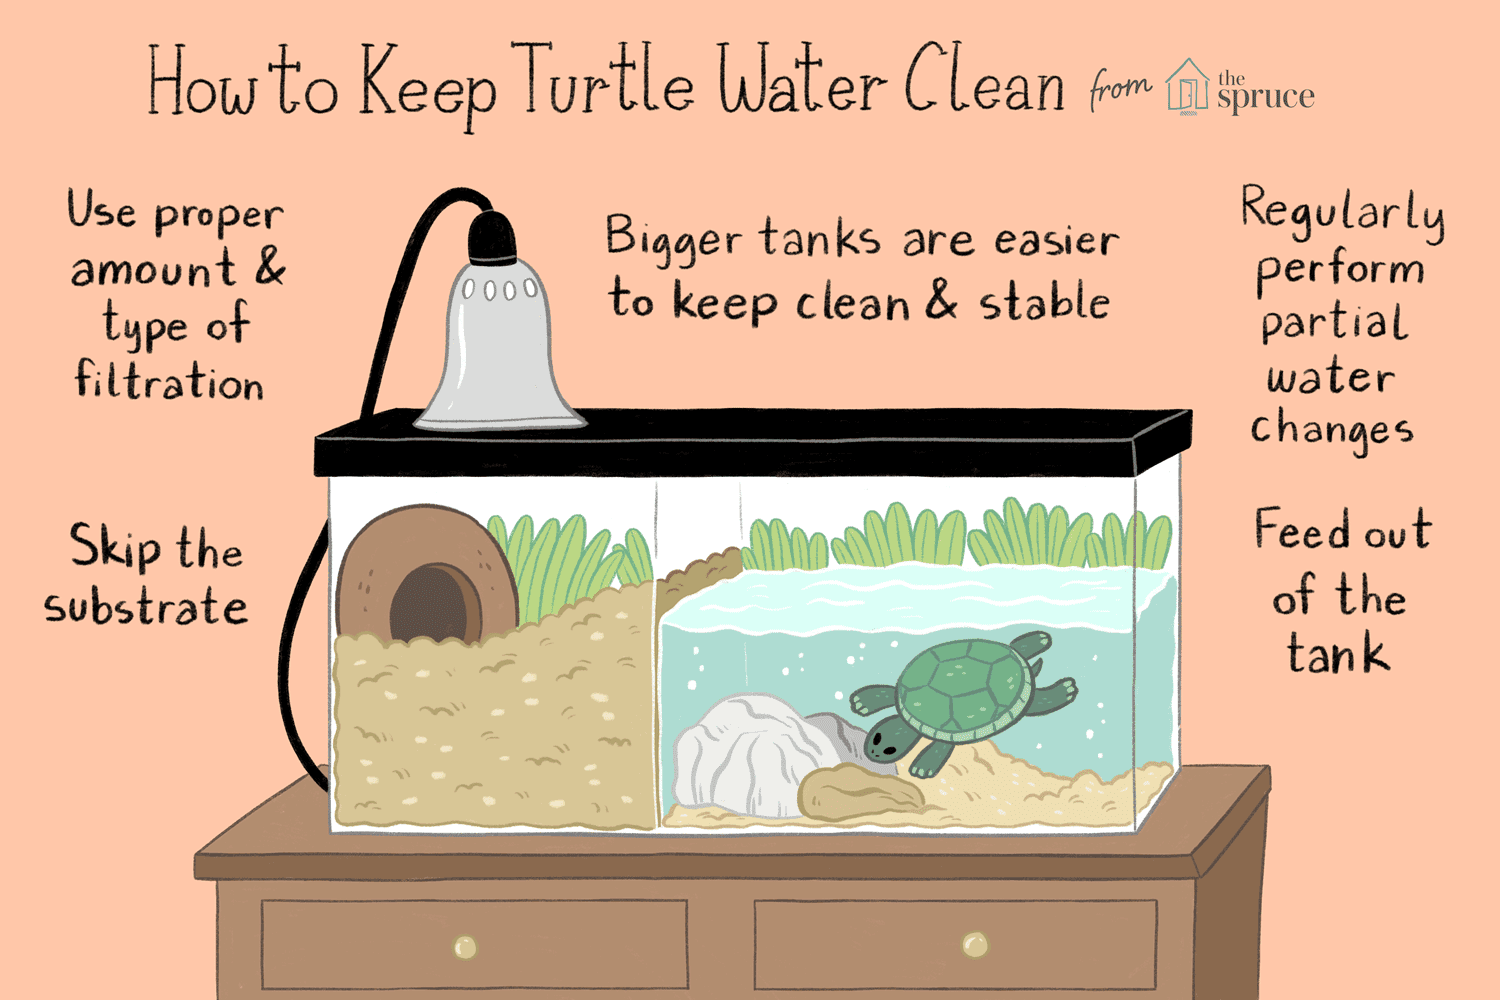 How To Maintain Water Quality In Your Turtle’s Aquarium